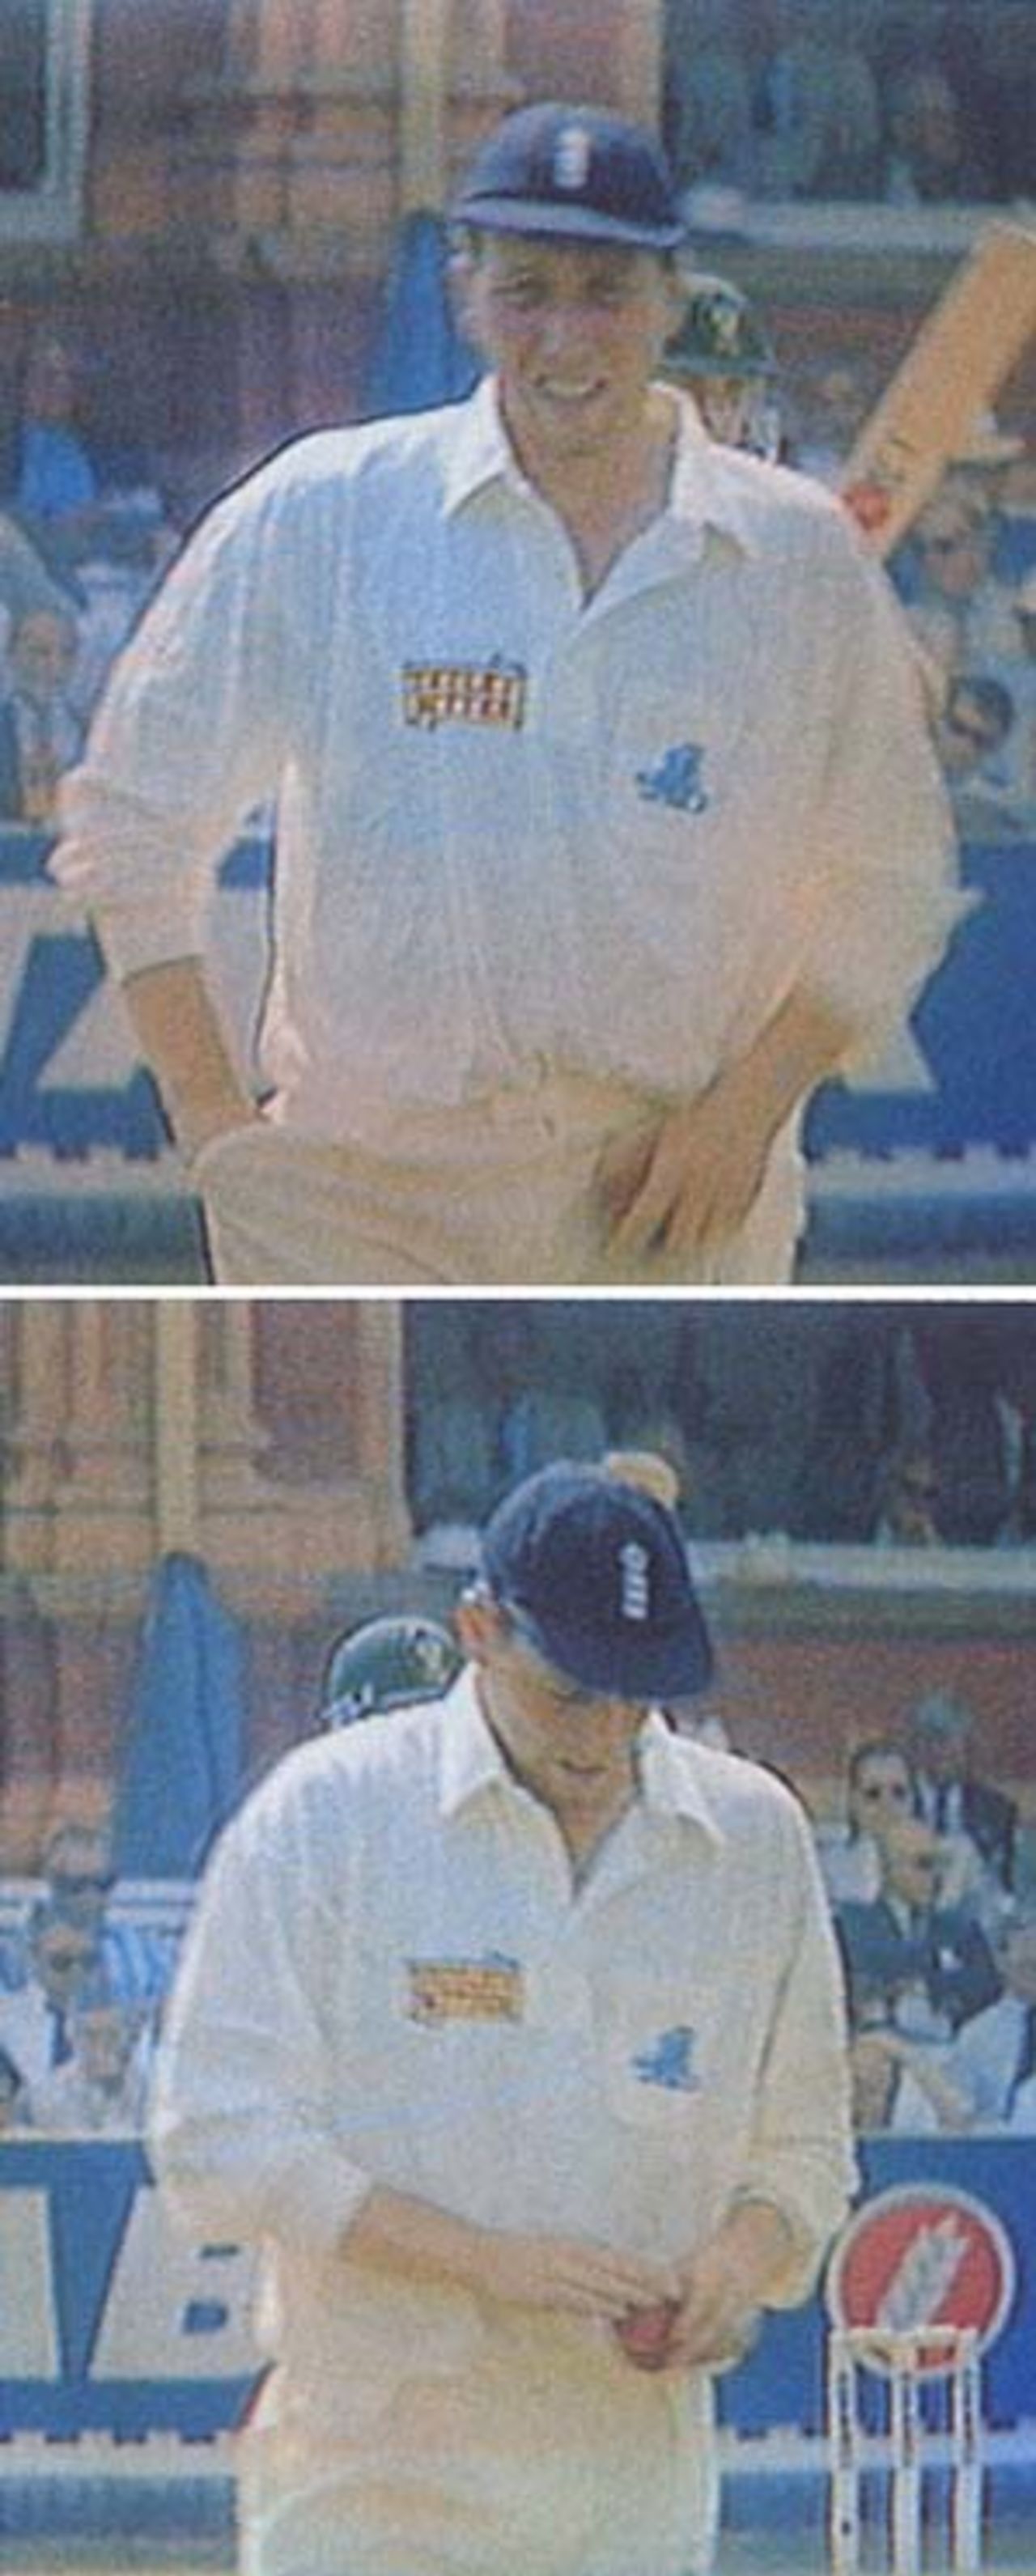 Michael Atherton caught on camera during the dirt-in-the-pocket affair, England v South Africa, Lord's, 1994